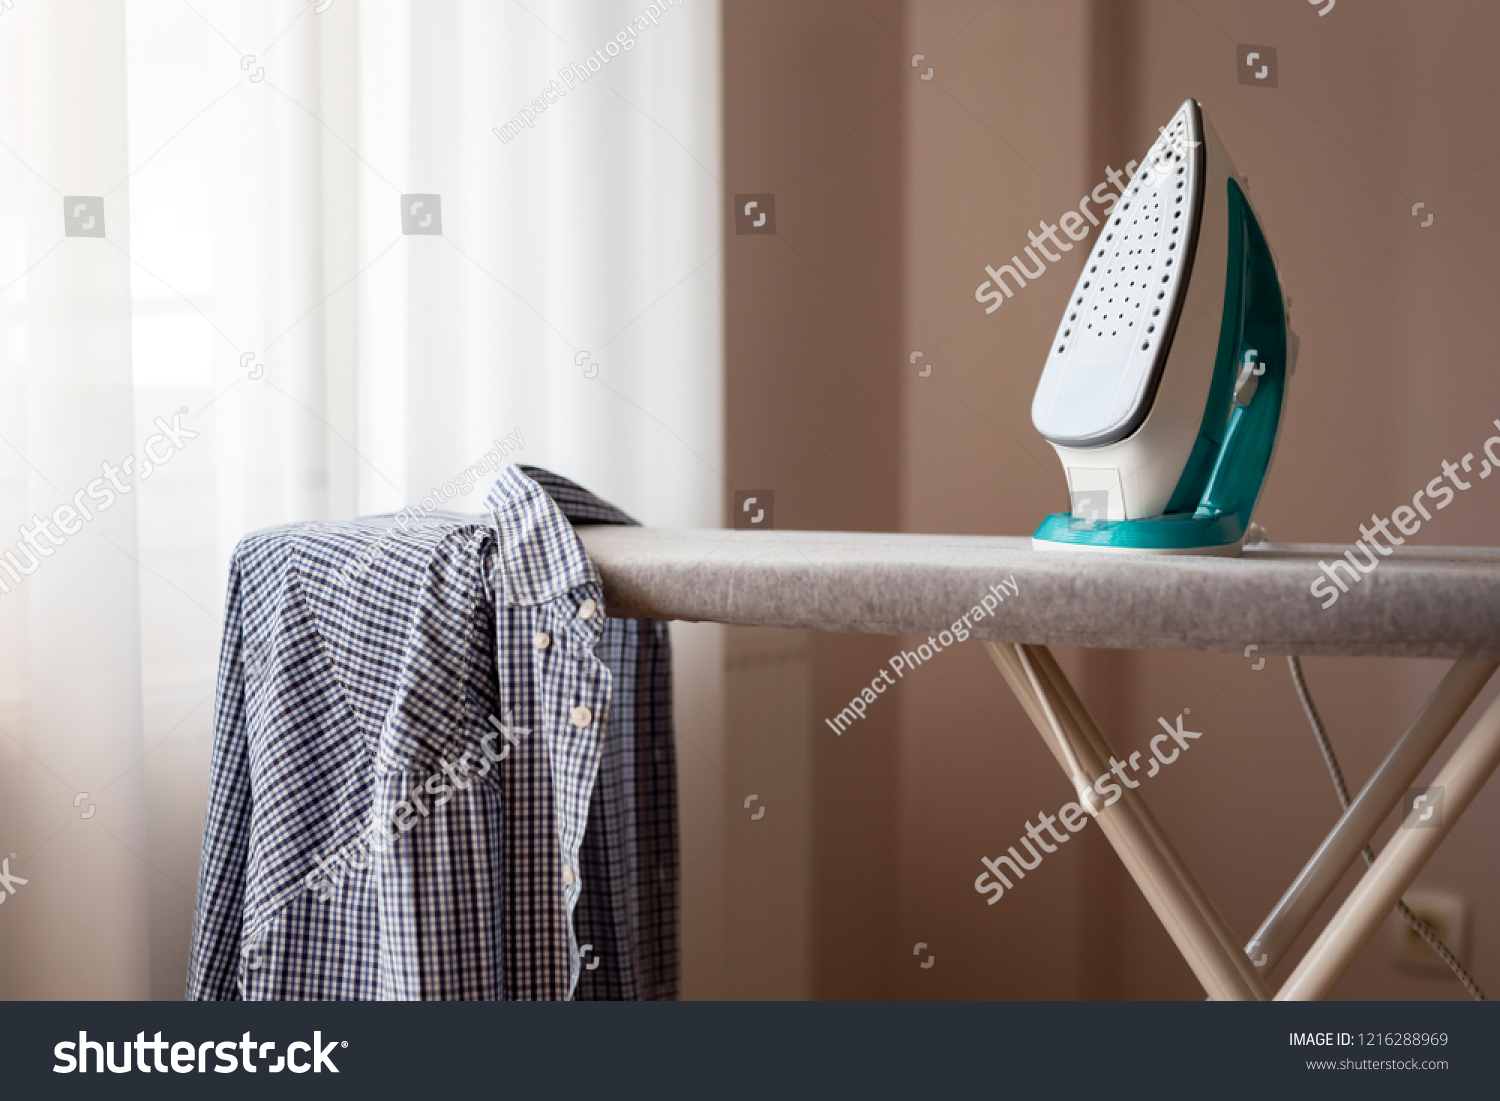 Ironed shirt hanging from an ironing board next to a hot iron. Selective focus on the iron #1216288969